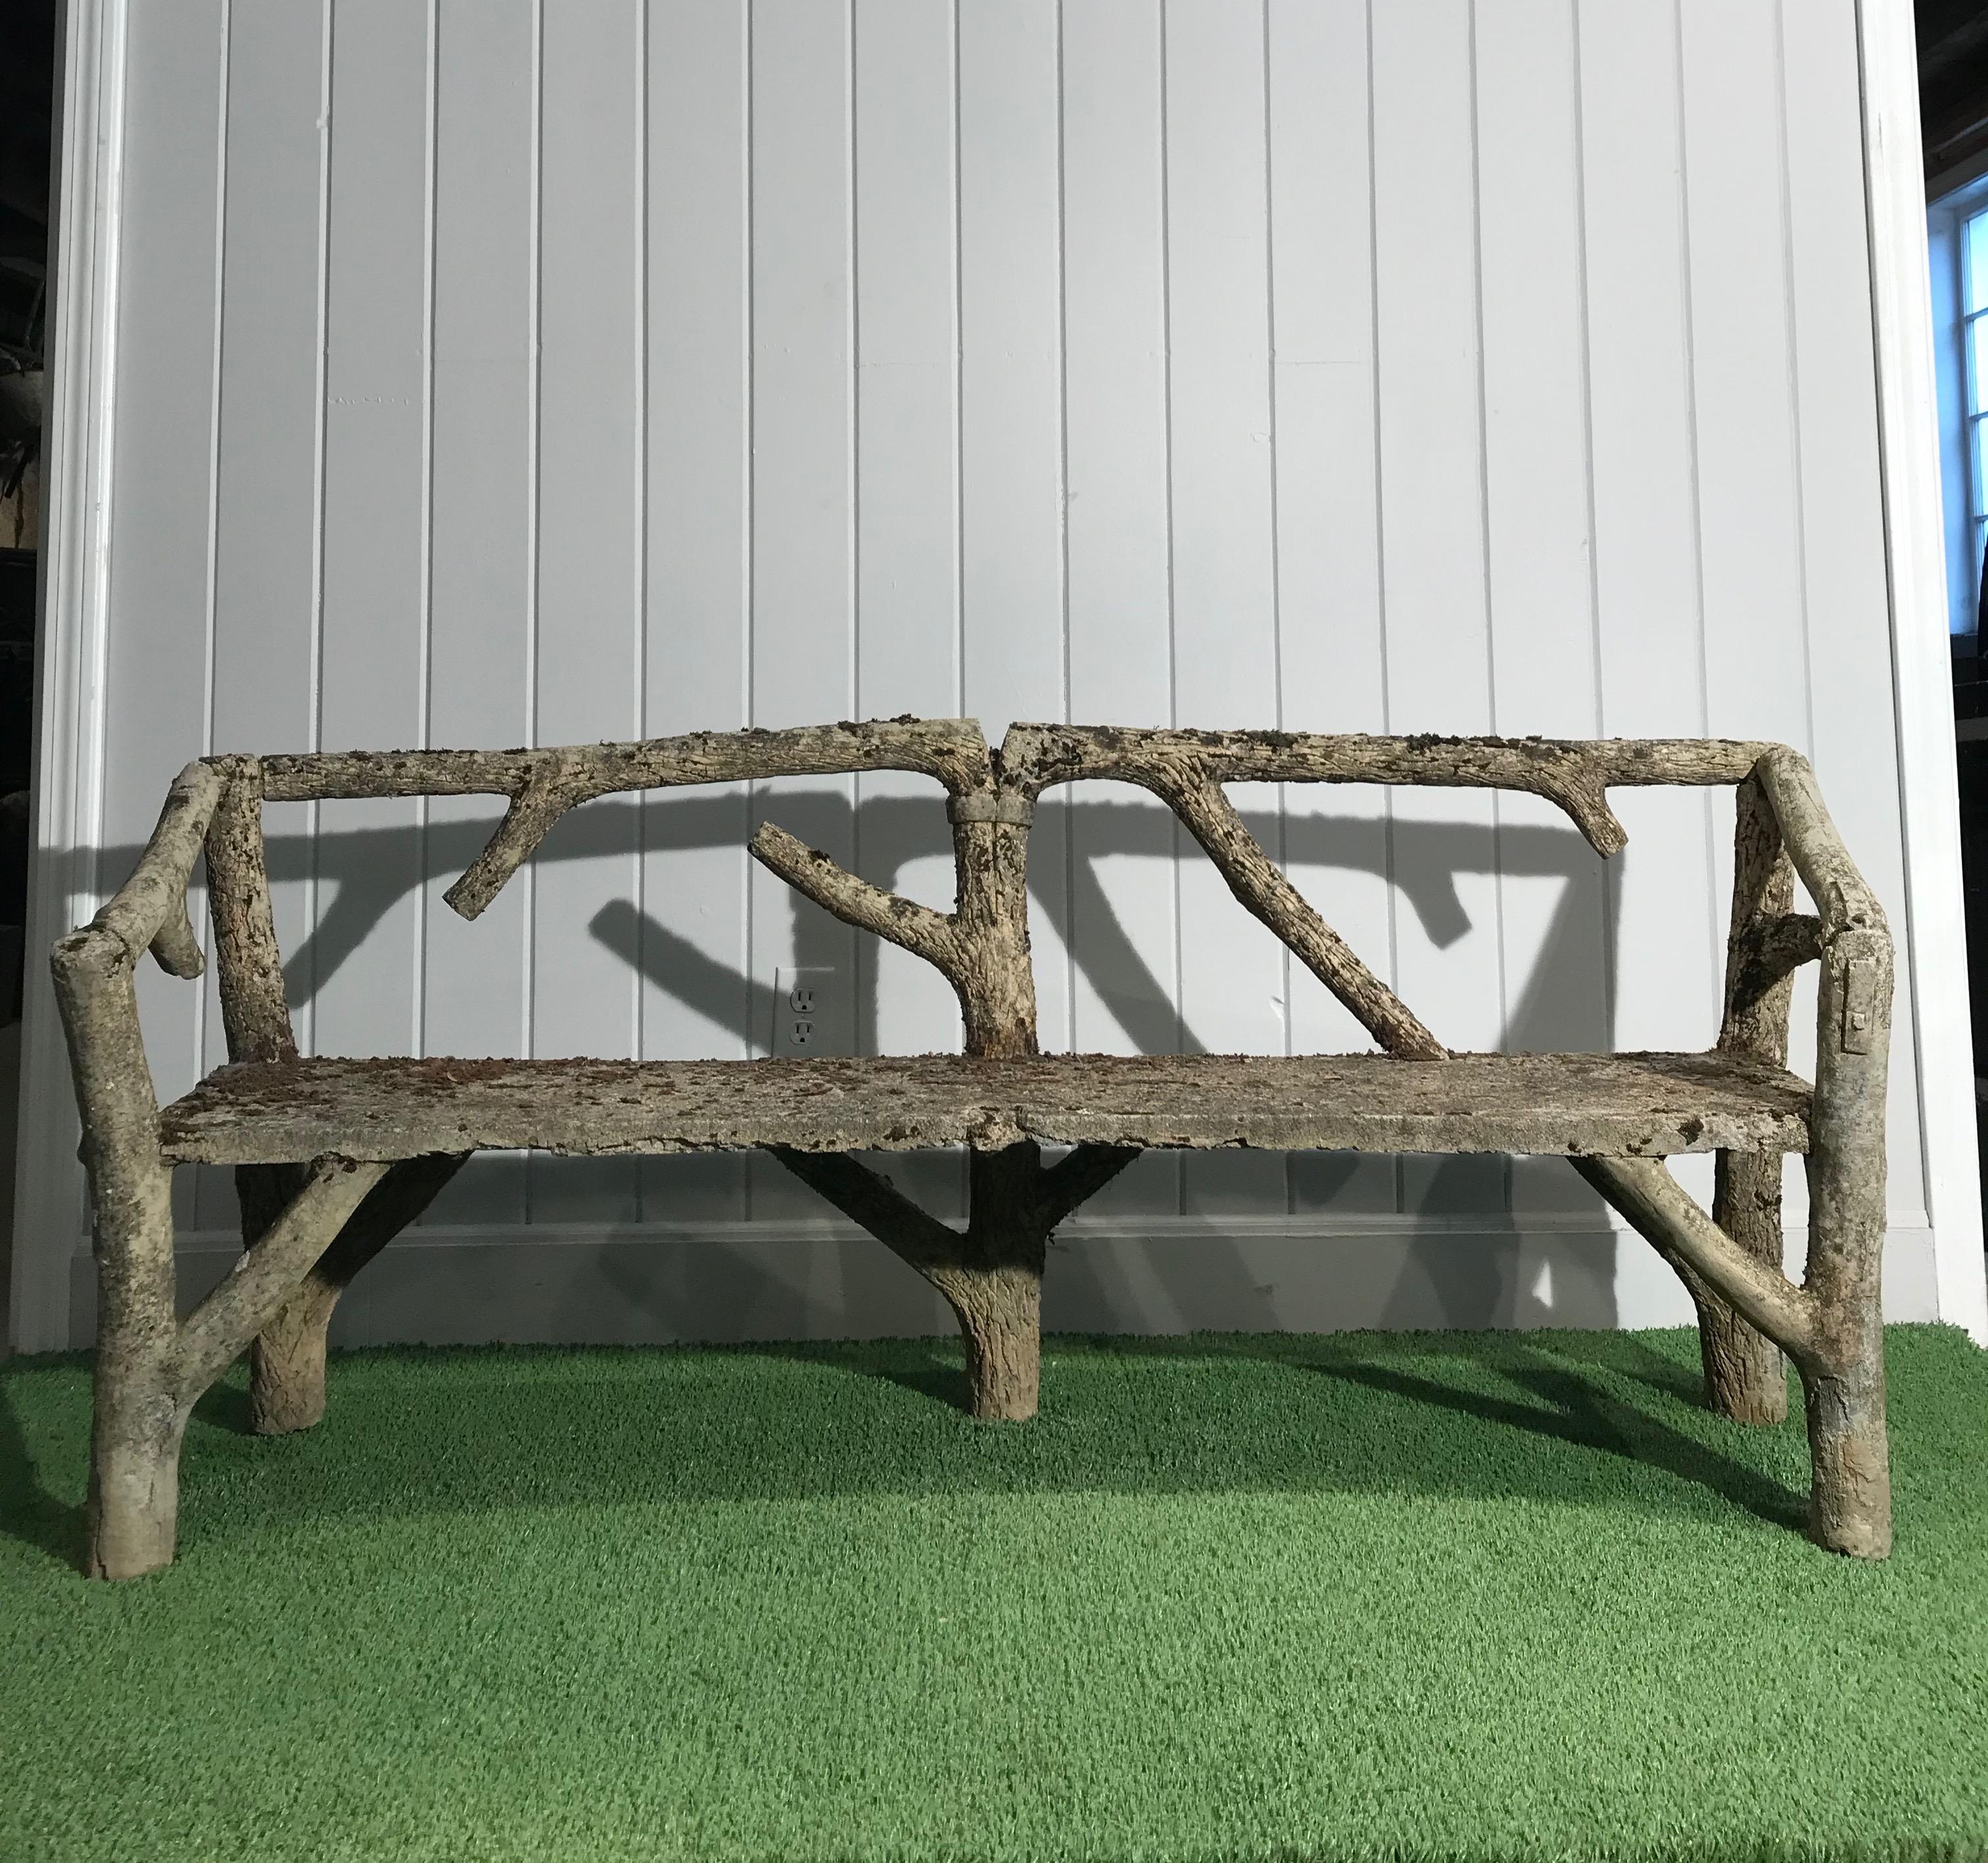 We found this stunning naturalistic and rare faux bois bench in the Normandy region of France and it dates to the 1930s. It has a beautiful weathered patina with mossy patches that will flourish and propagate if the bench is placed in a shady and